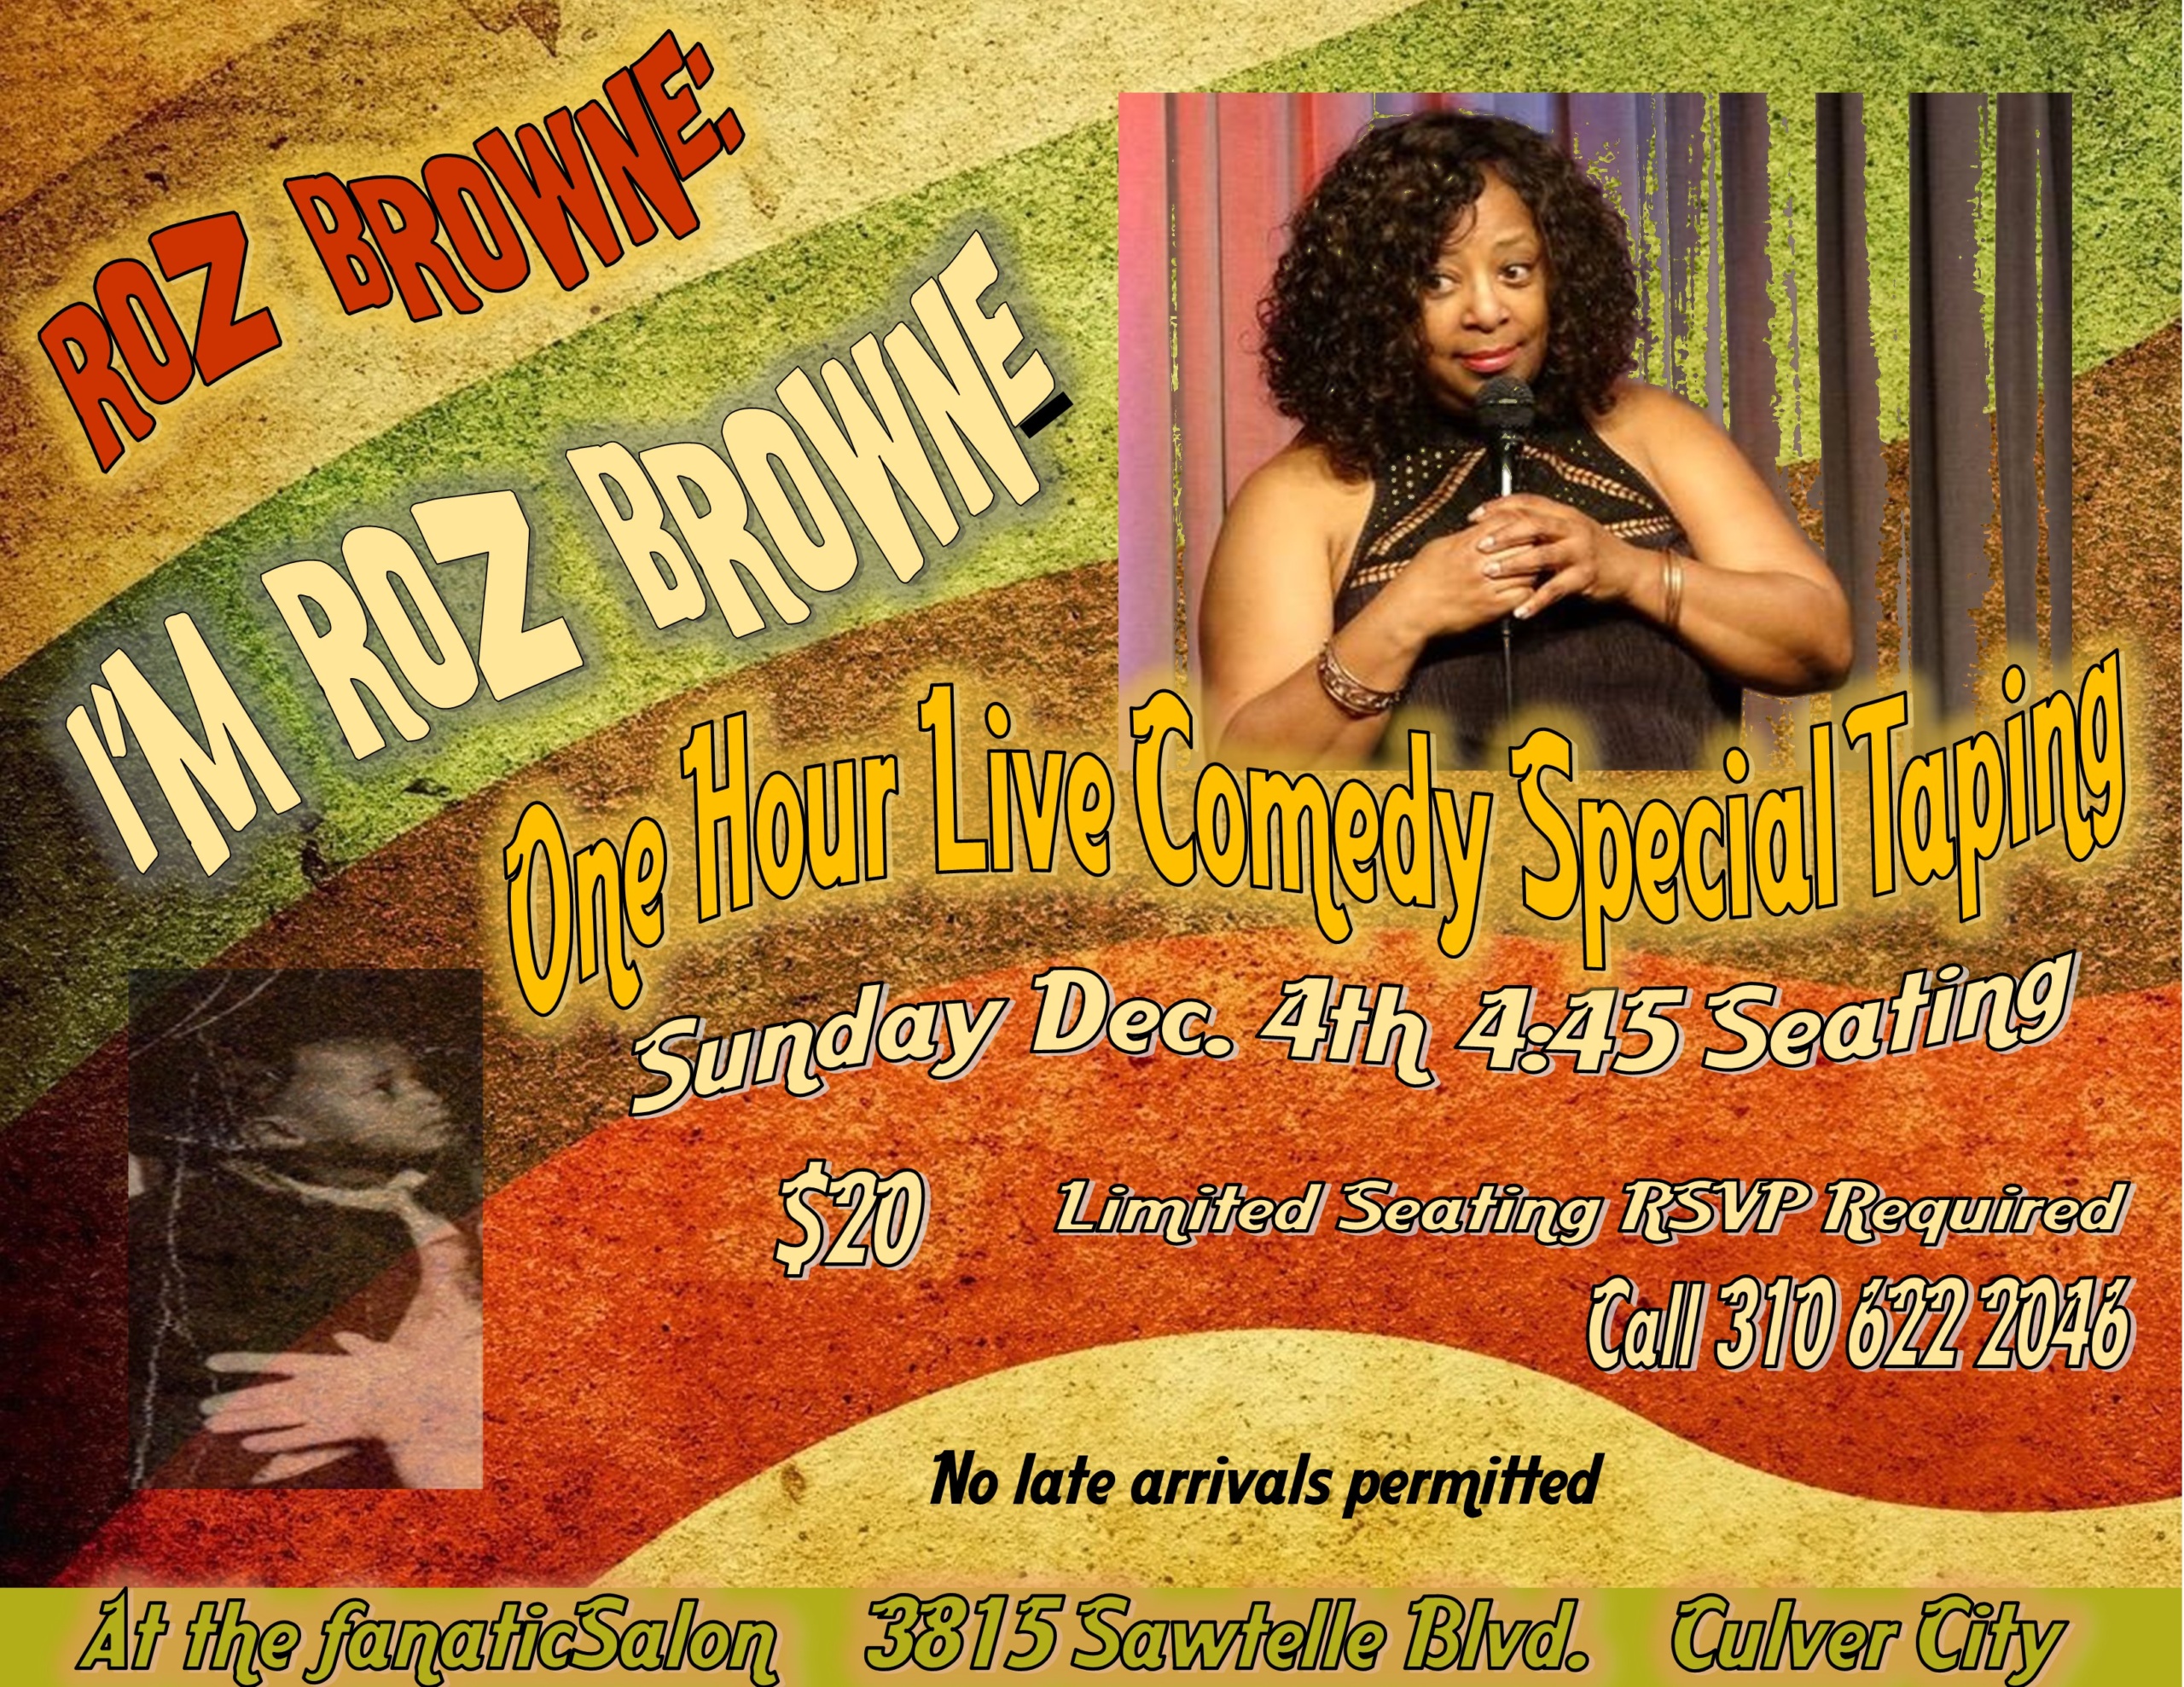 roz browne, stand up, special, fanatic salon, culver city